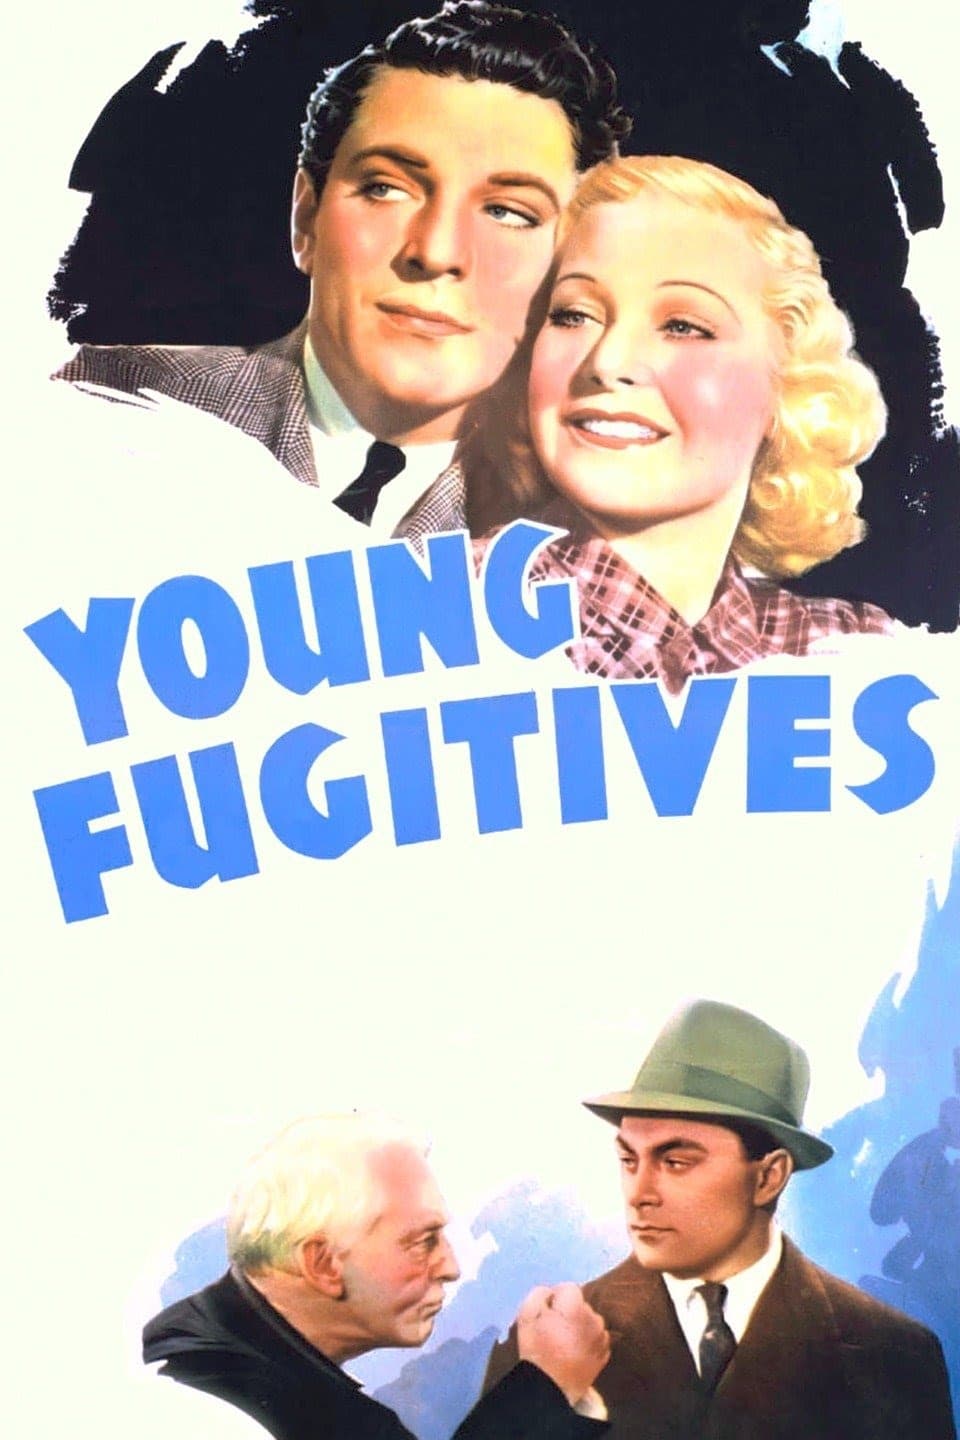 Young Fugitives